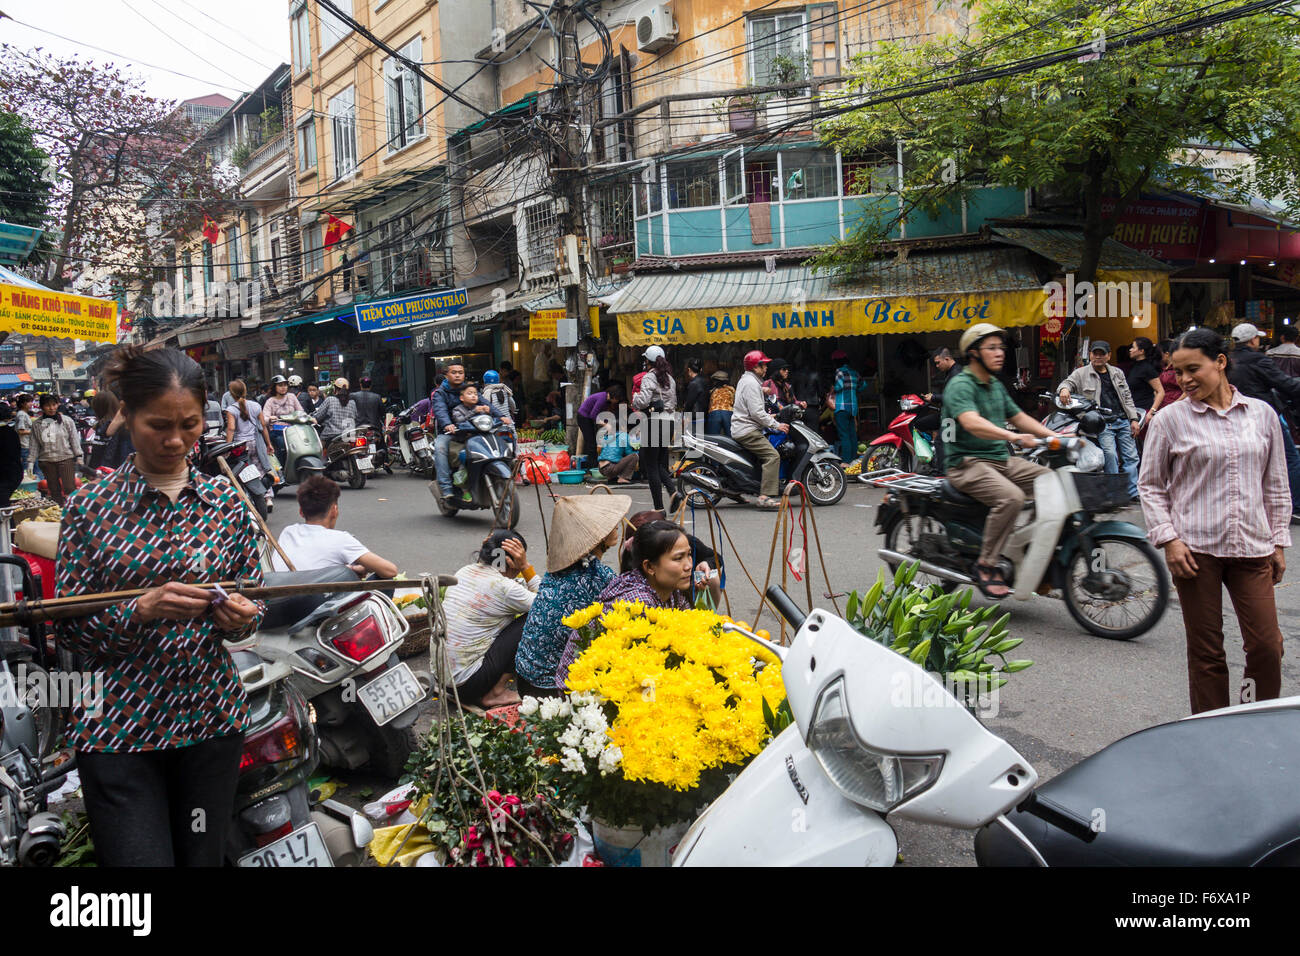 HANOI - FEBRUARY 17, 2015: Street food selling and little markets in the small streets of old town, Hanoi City in Vietnam. Locals are buying food for the next day which was a holiday. Stock Photo